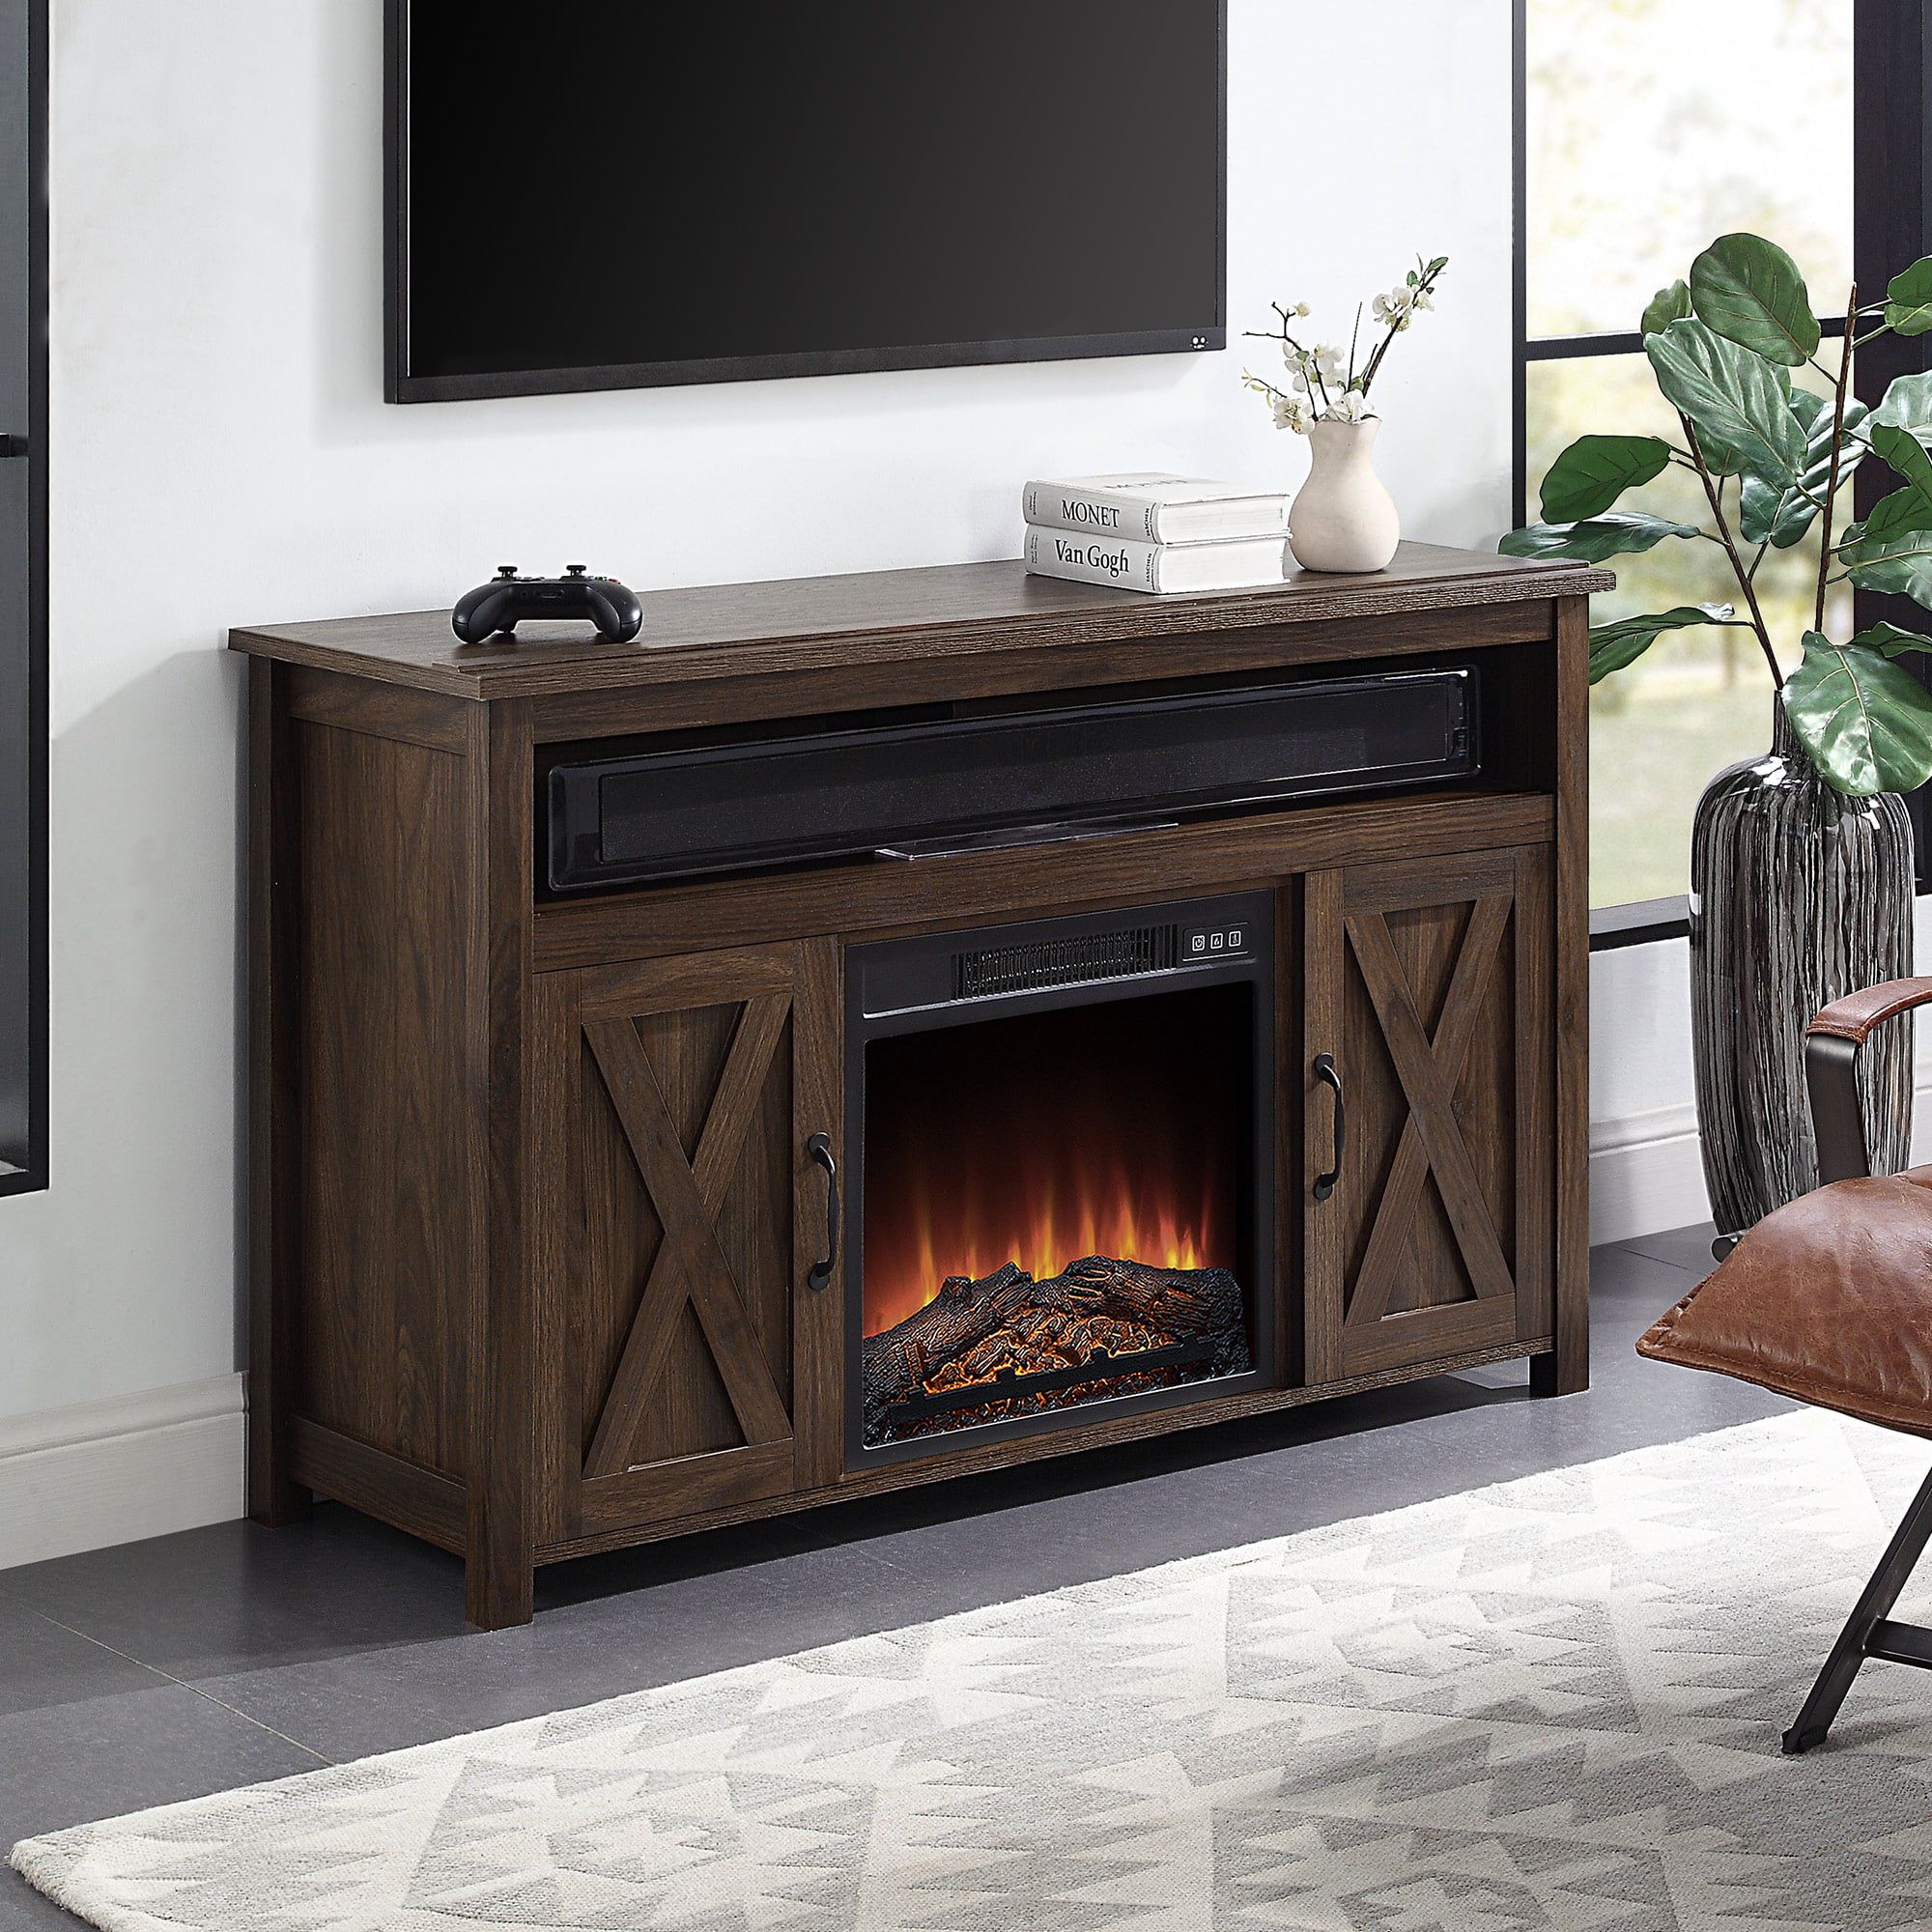 Belleze Tv Stand Console Electric Fireplace With Remote Control, 48" Or Within Electric Fireplace Tv Stands (View 4 of 20)